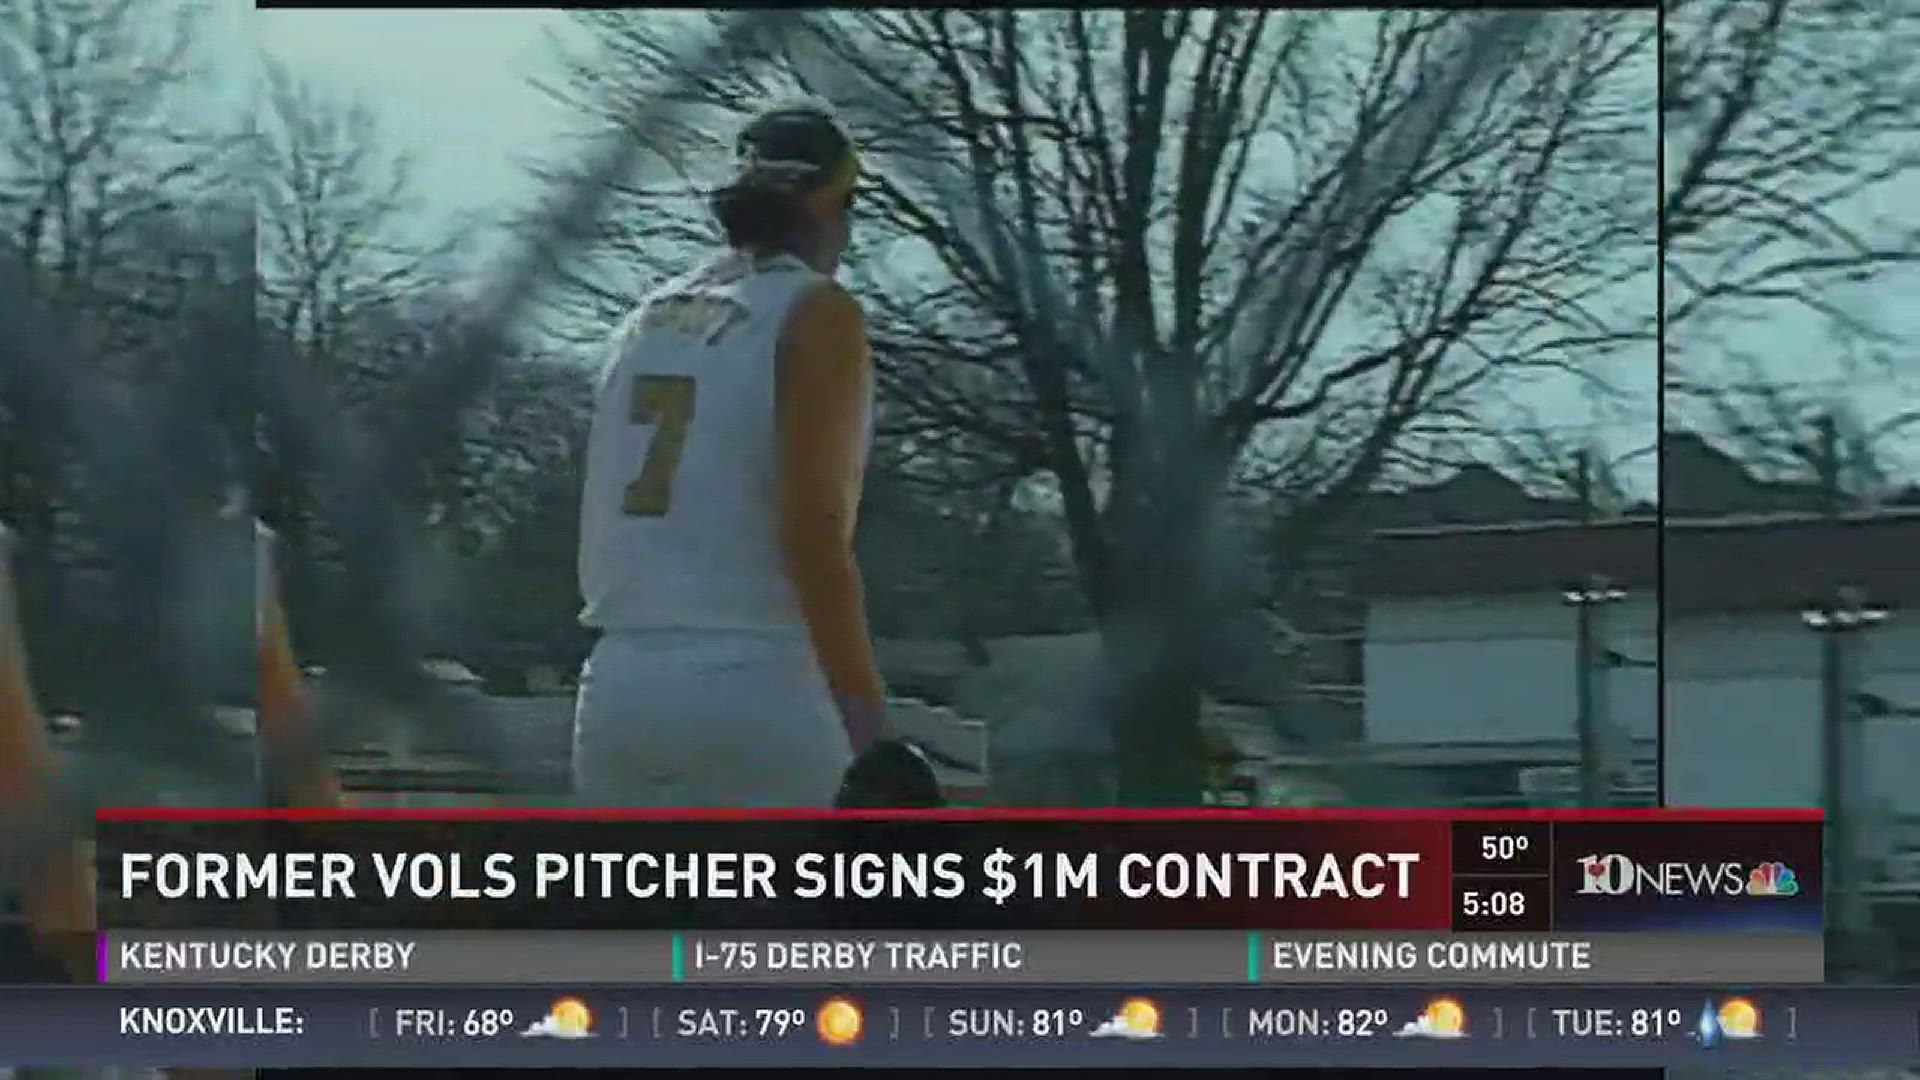 Softball pitcher Monica Abbott signed a six-year $1 million contract with the Houston-area Scrap Yard Dawgs, believed to be the most lucrative paid by an individual American professional franchise to an active female athlete in team sports.